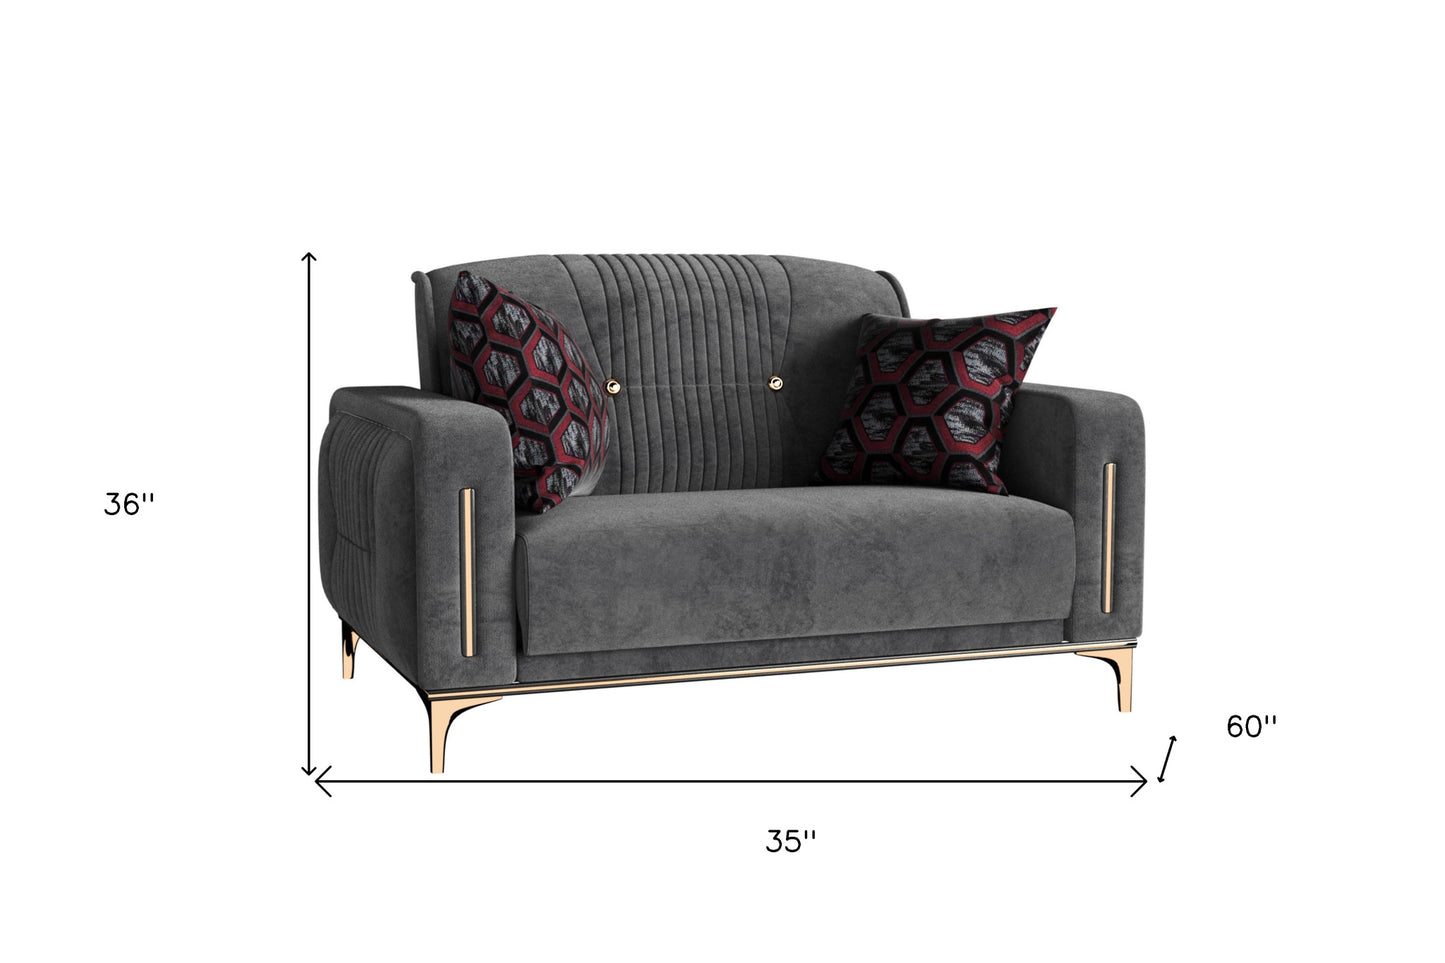 60" Gray Gold Microfiber Love Seat With Storage